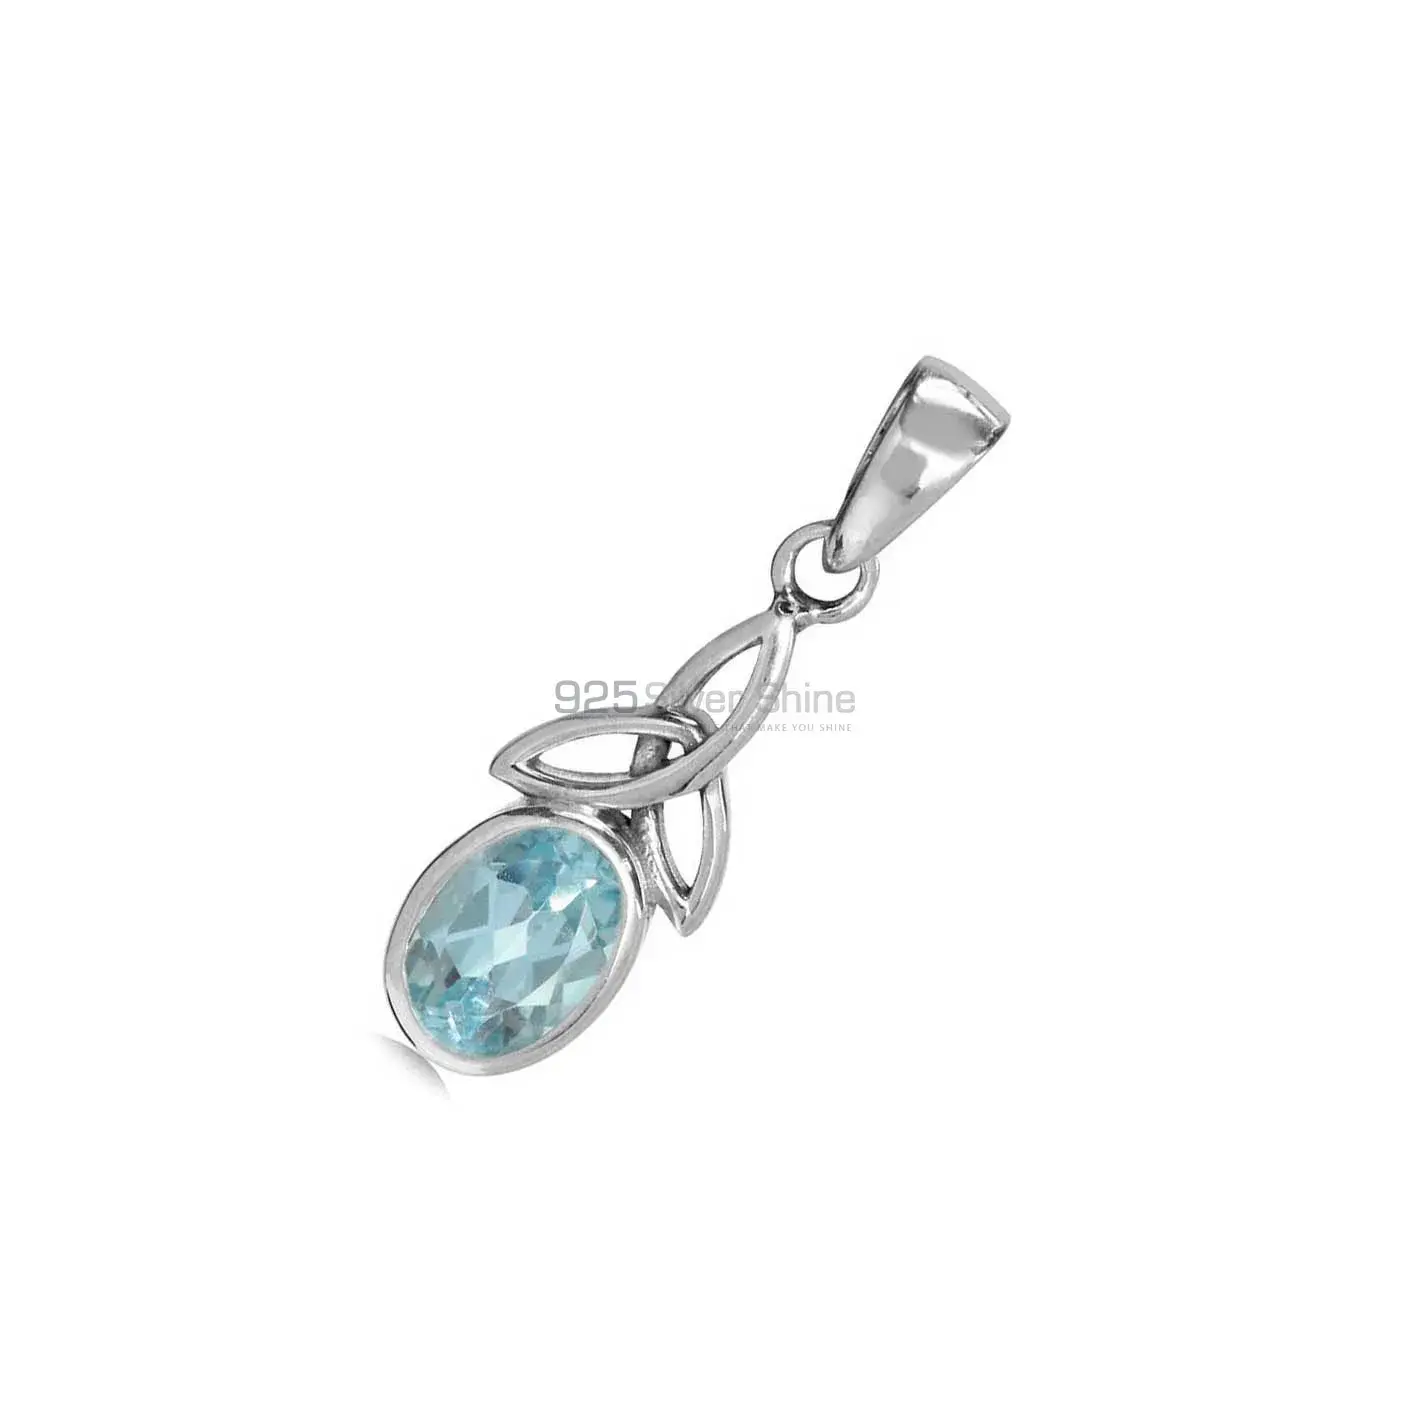 High Quality 925 Fine Silver Pendants Suppliers In Blue Topaz Gemstone Jewelry 925SP06-4_0